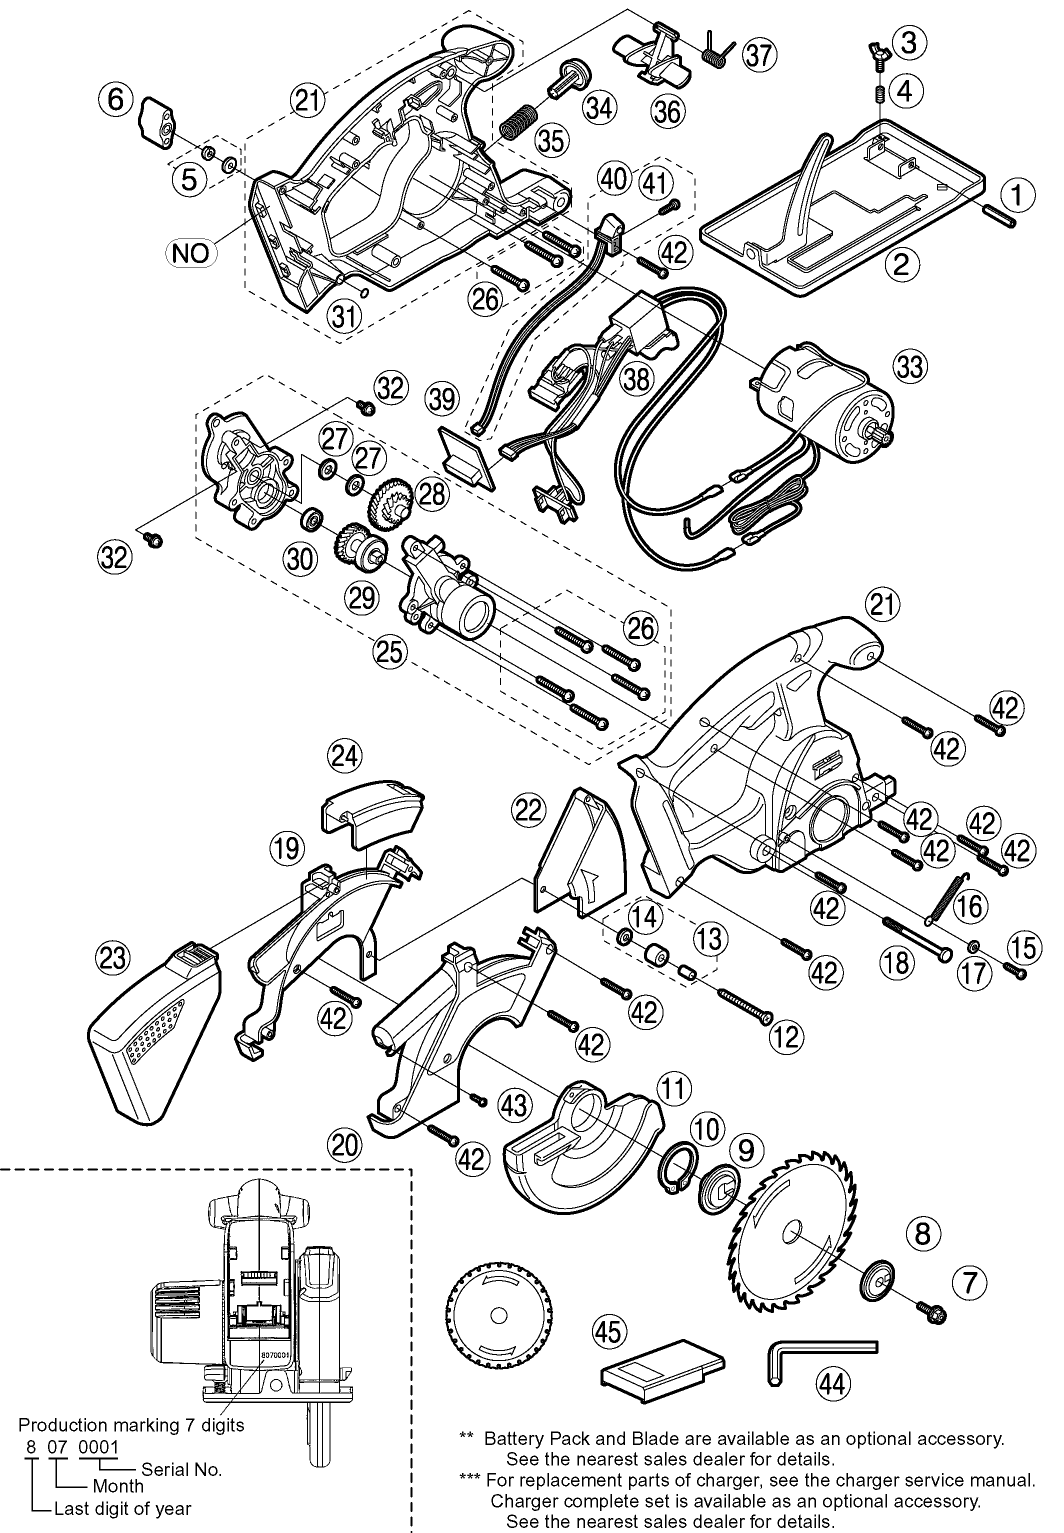 EY4542: Exploded View